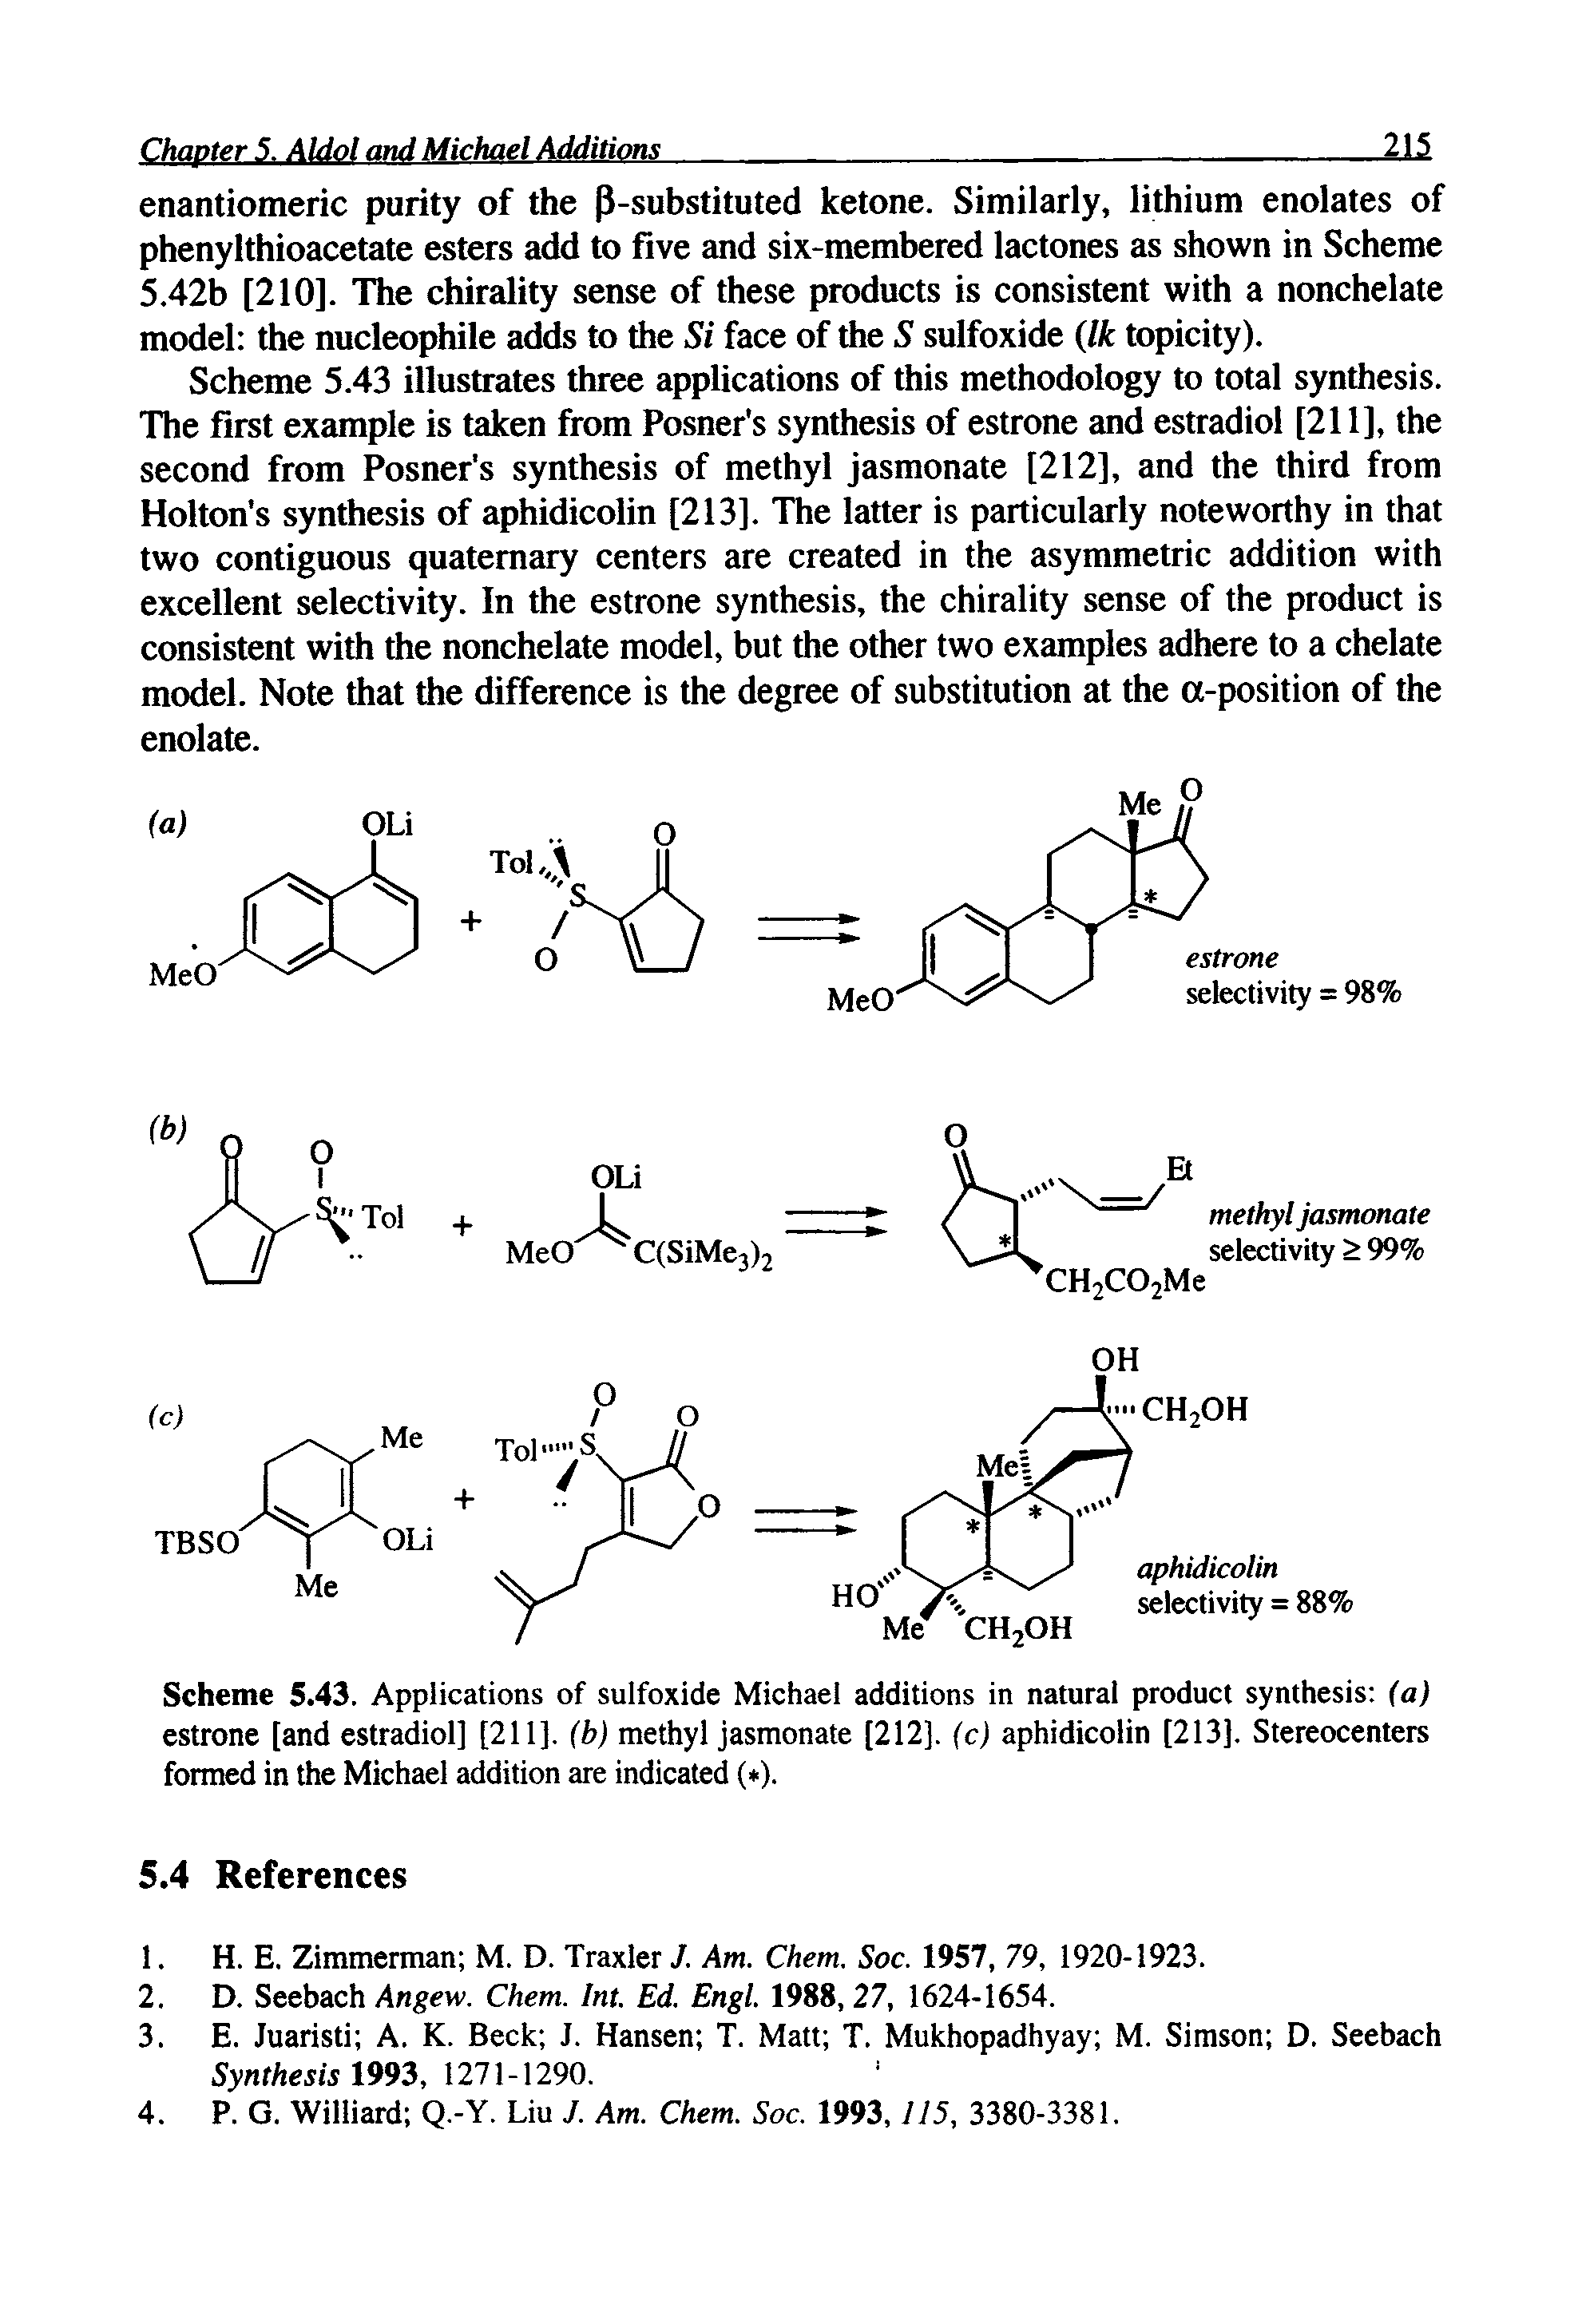 Scheme 5.43. Applications of sulfoxide Michael additions in natural product synthesis (a) estrone [and estradiol] [211], (b) methyl jasmonate [212], (c) aphidicolin [213], Stereocenters formed in the Michael addition are indicated ( ).